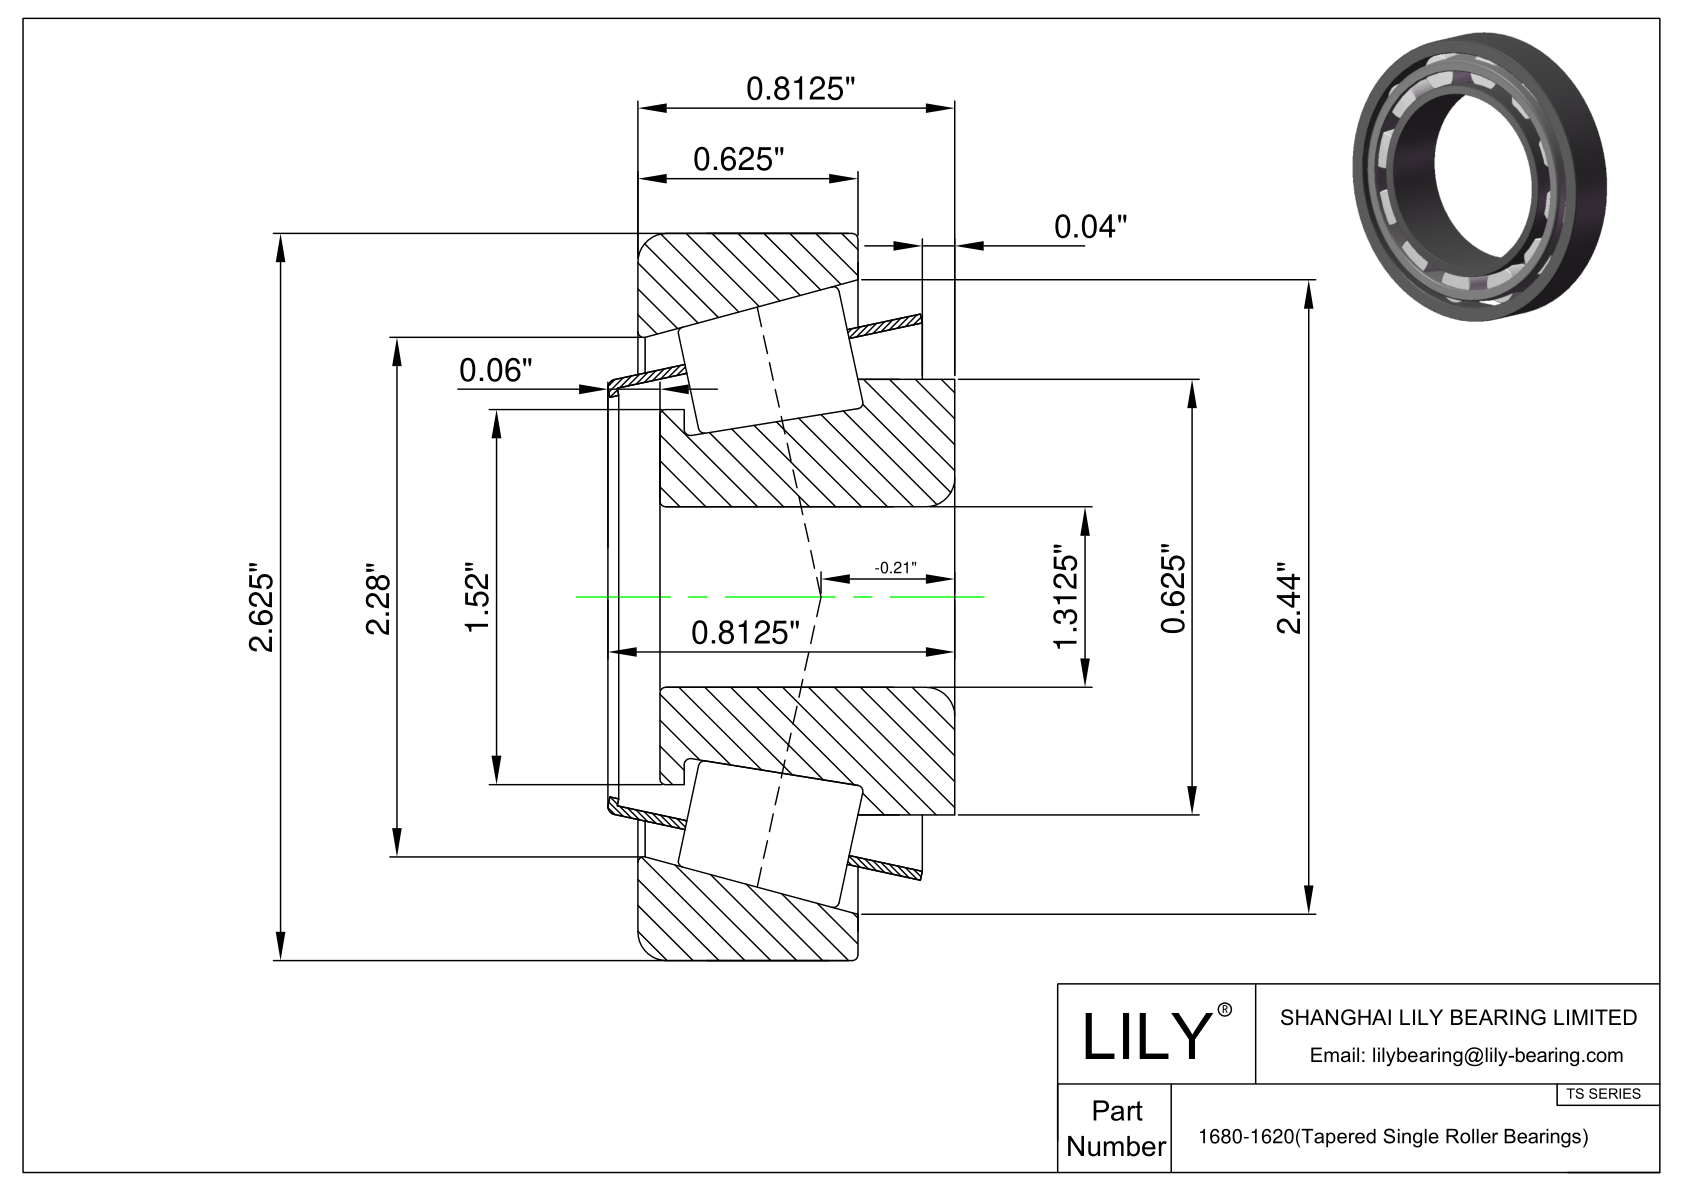 1680-1620 TS (Tapered Single Roller Bearings) (Imperial) cad drawing